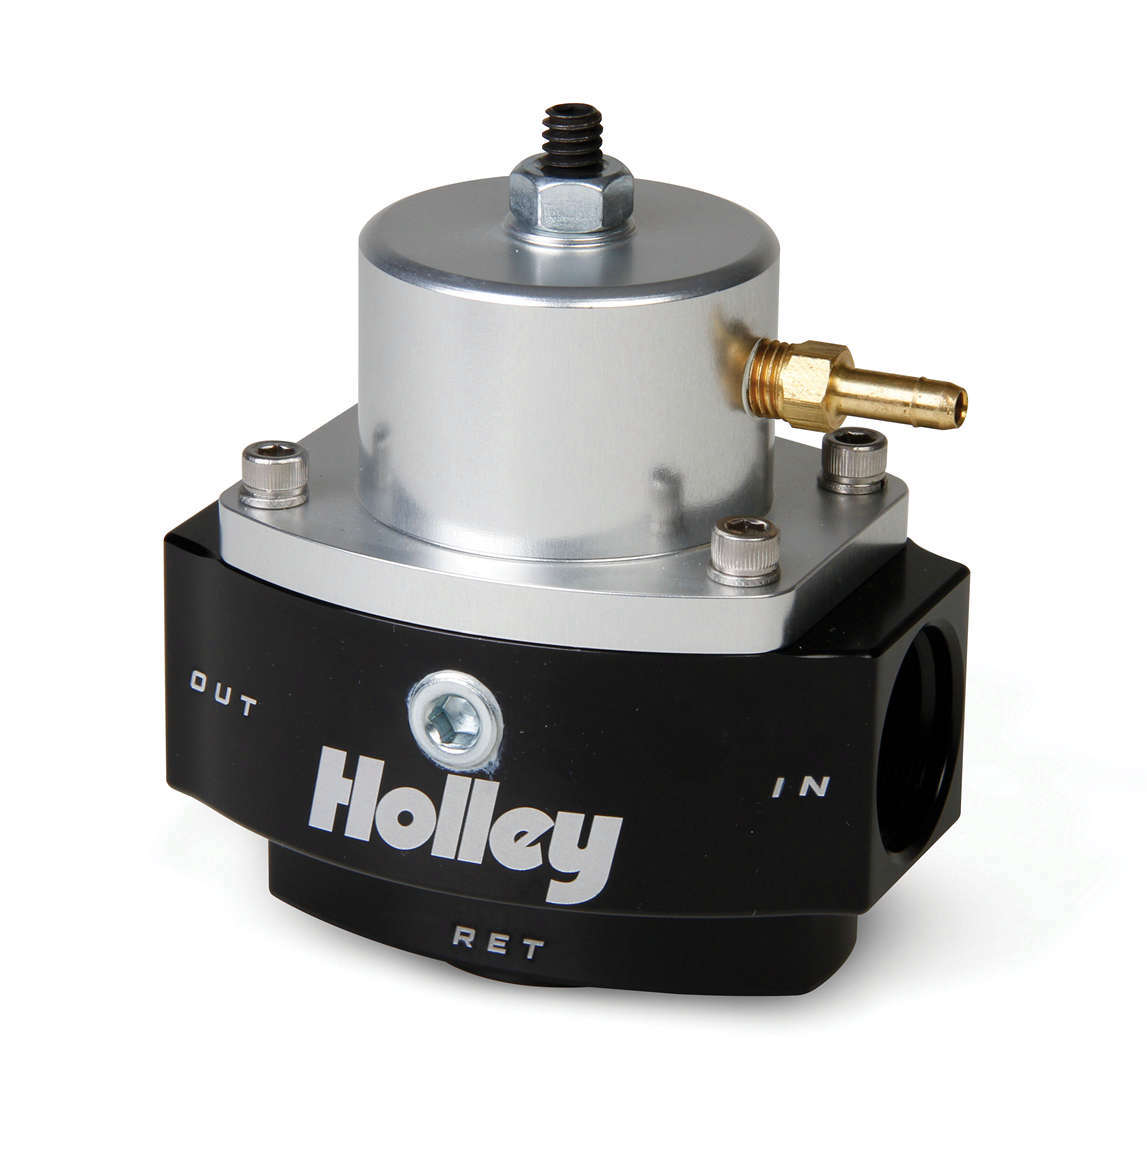 Holley 12-848 Fuel Pressure Regulator, Dominator Billet, 15 to 65 psi, In-Line, 10 AN Female O-Ring Inlet, 10 AN Female O-Ring Outlet, 8 AN O-Ring Return, 1/8 in NPT Port, Bypass, Aluminum, Black / Clear Anodized, Diesel / E85 / Gas, Each